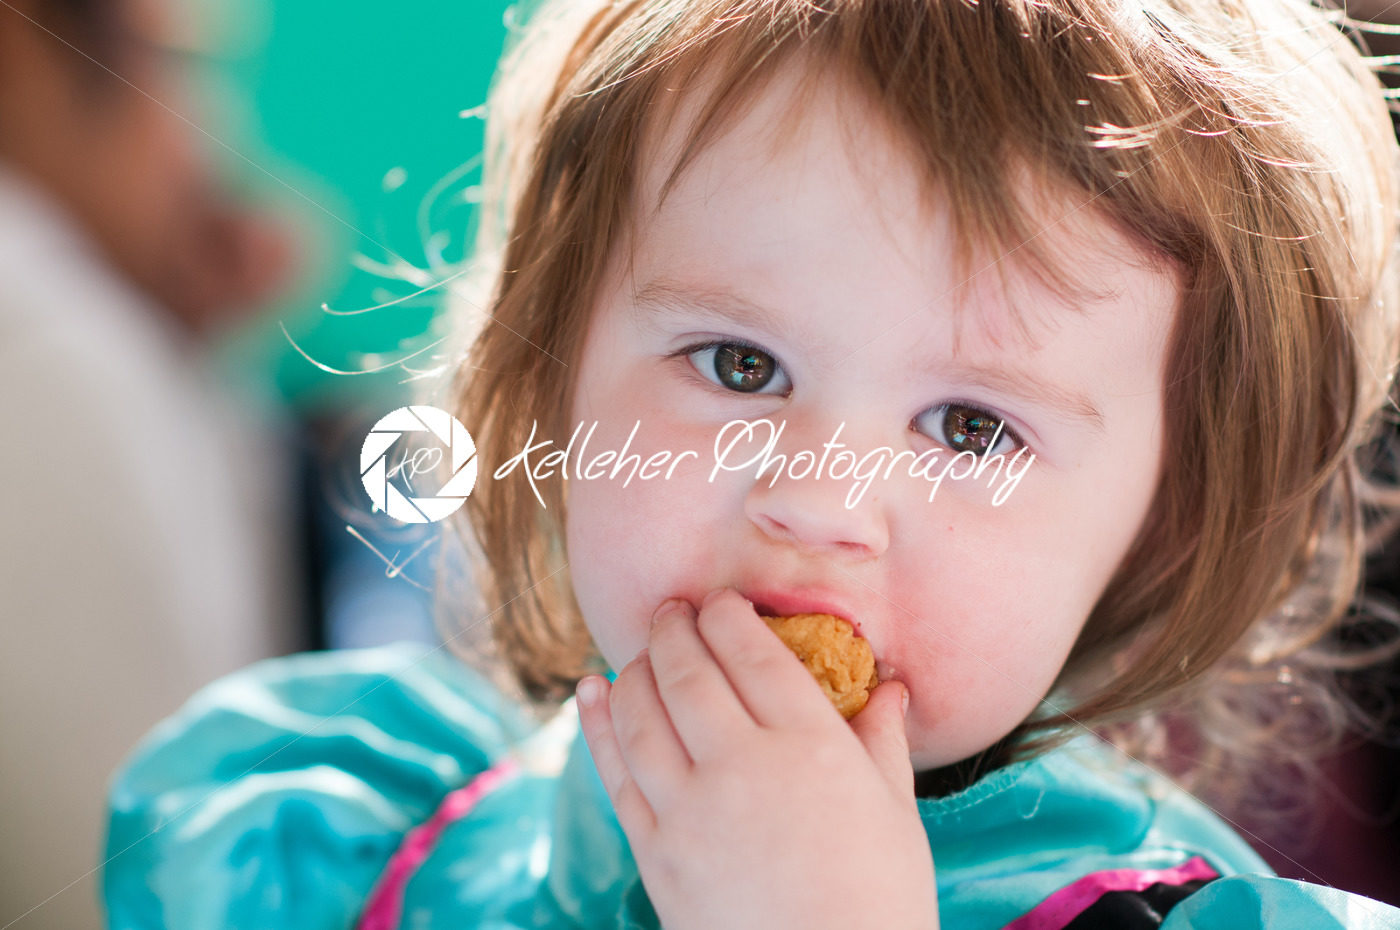 Close up Portrait of young girl eating - Kelleher Photography Store